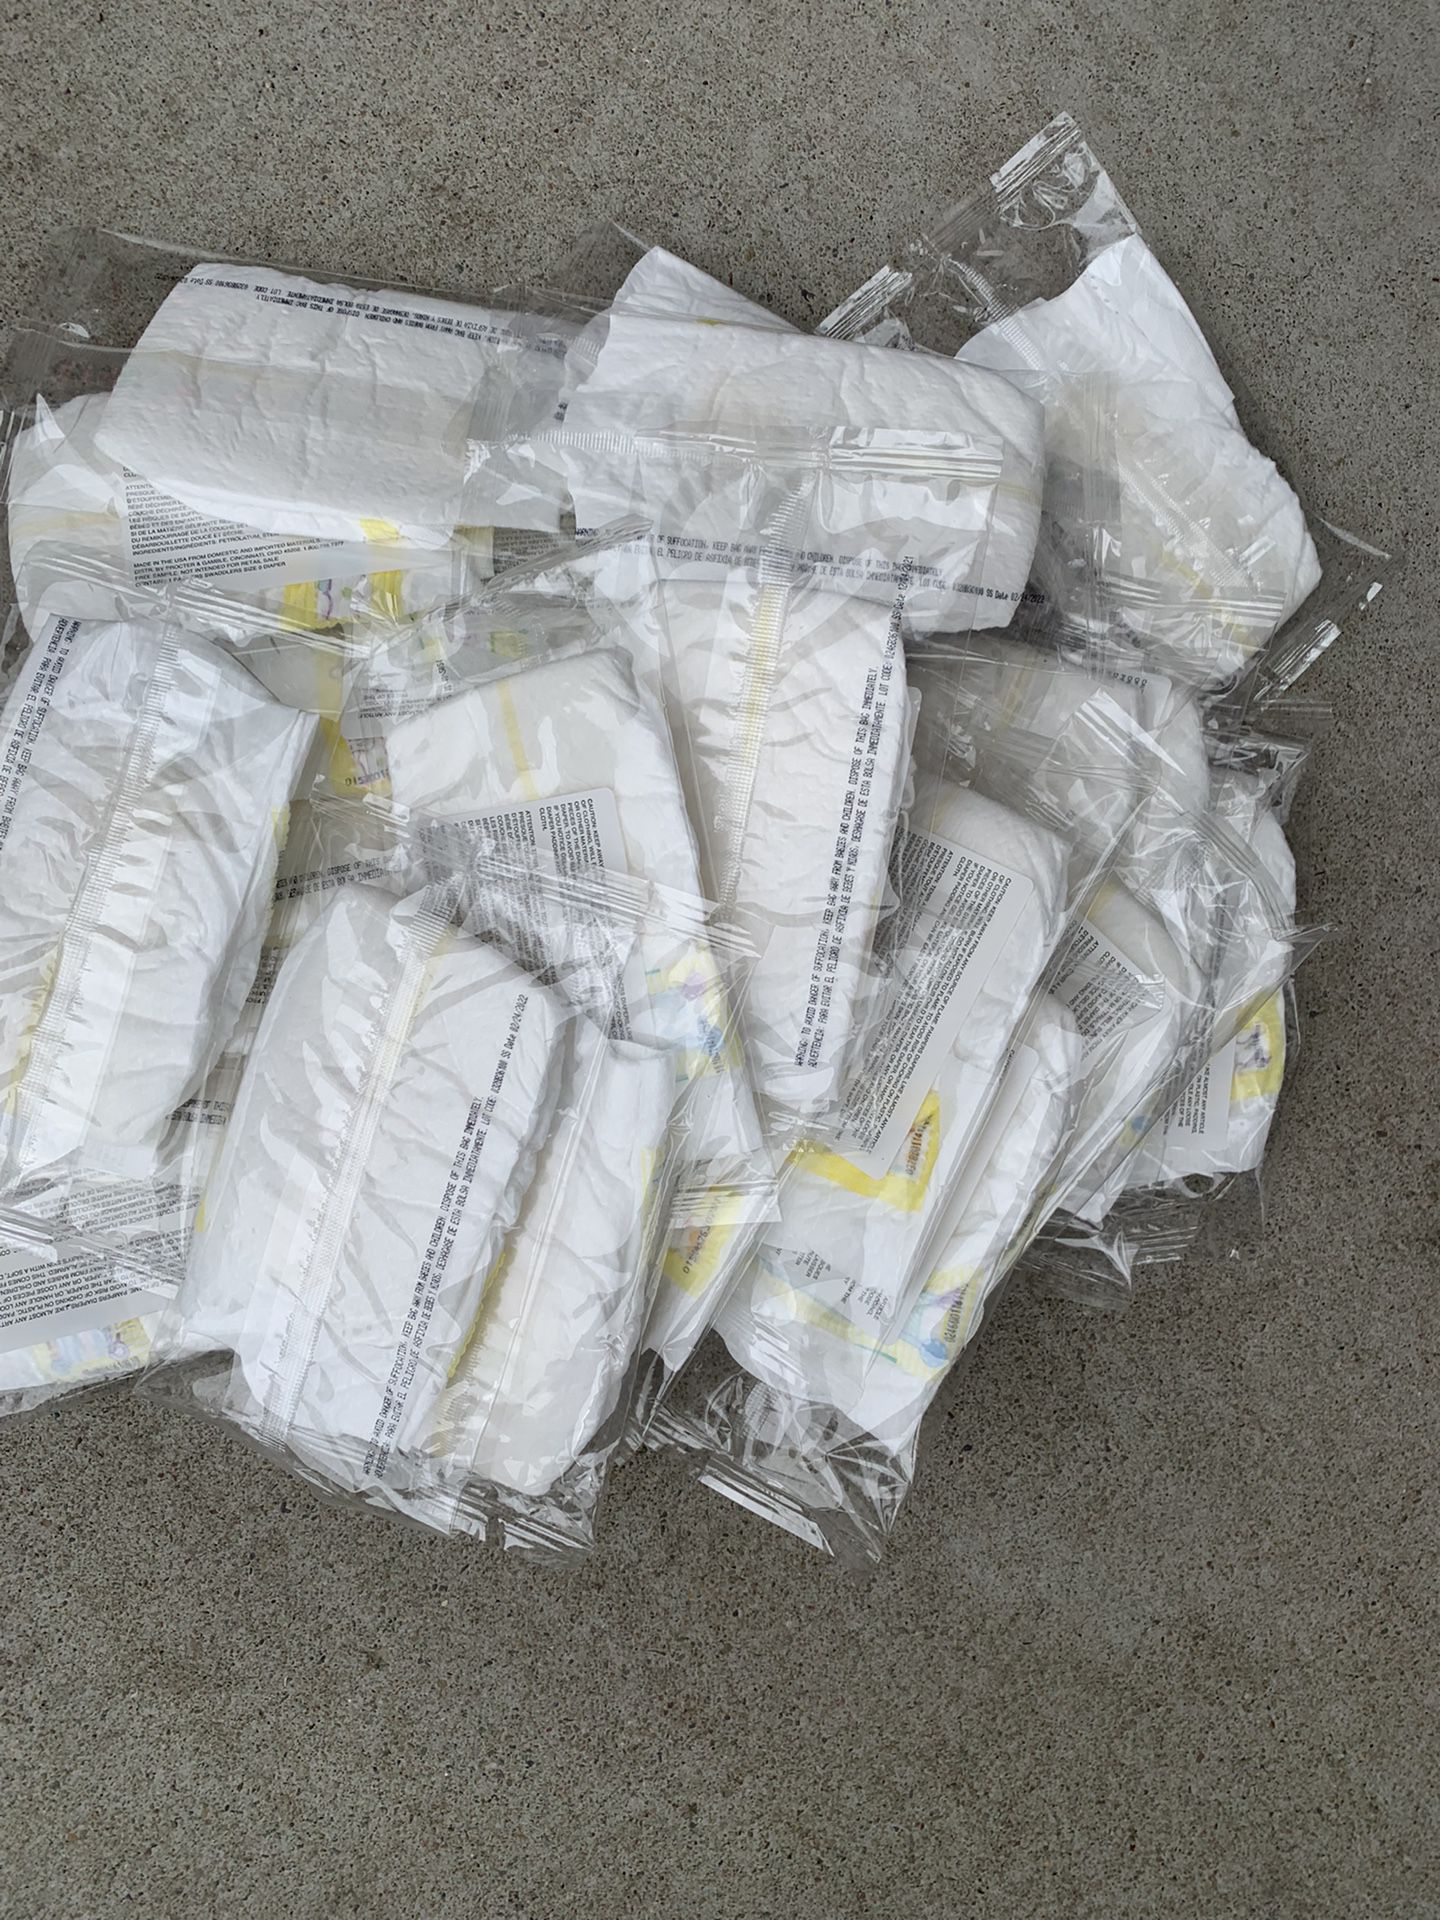 27 New Born Diapers